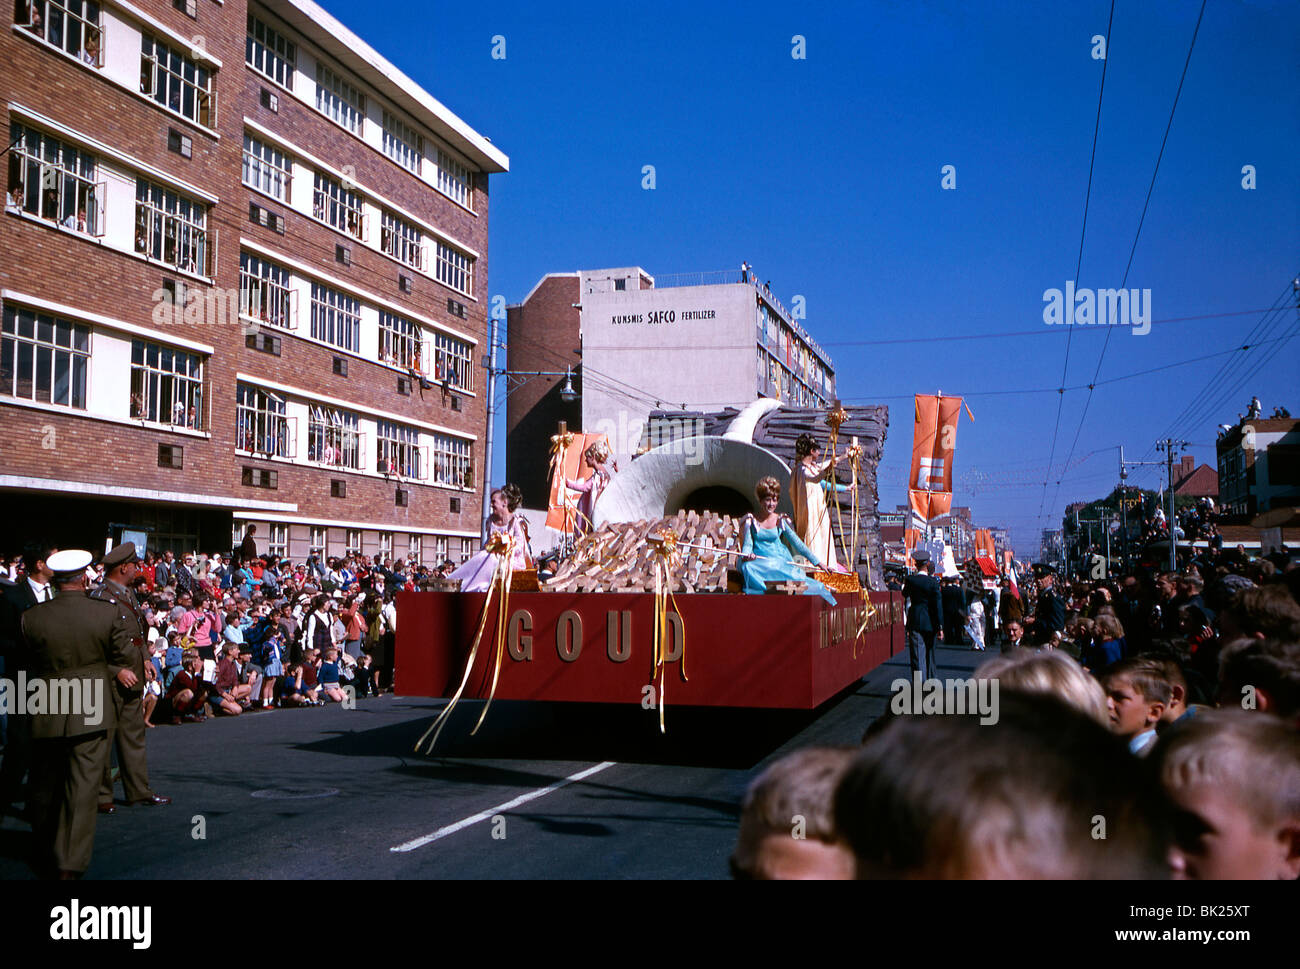 Parade float promoting South African gold (or goud in Afrikaans), during the apartheid era, Durban, South Africa, 1966 Stock Photo